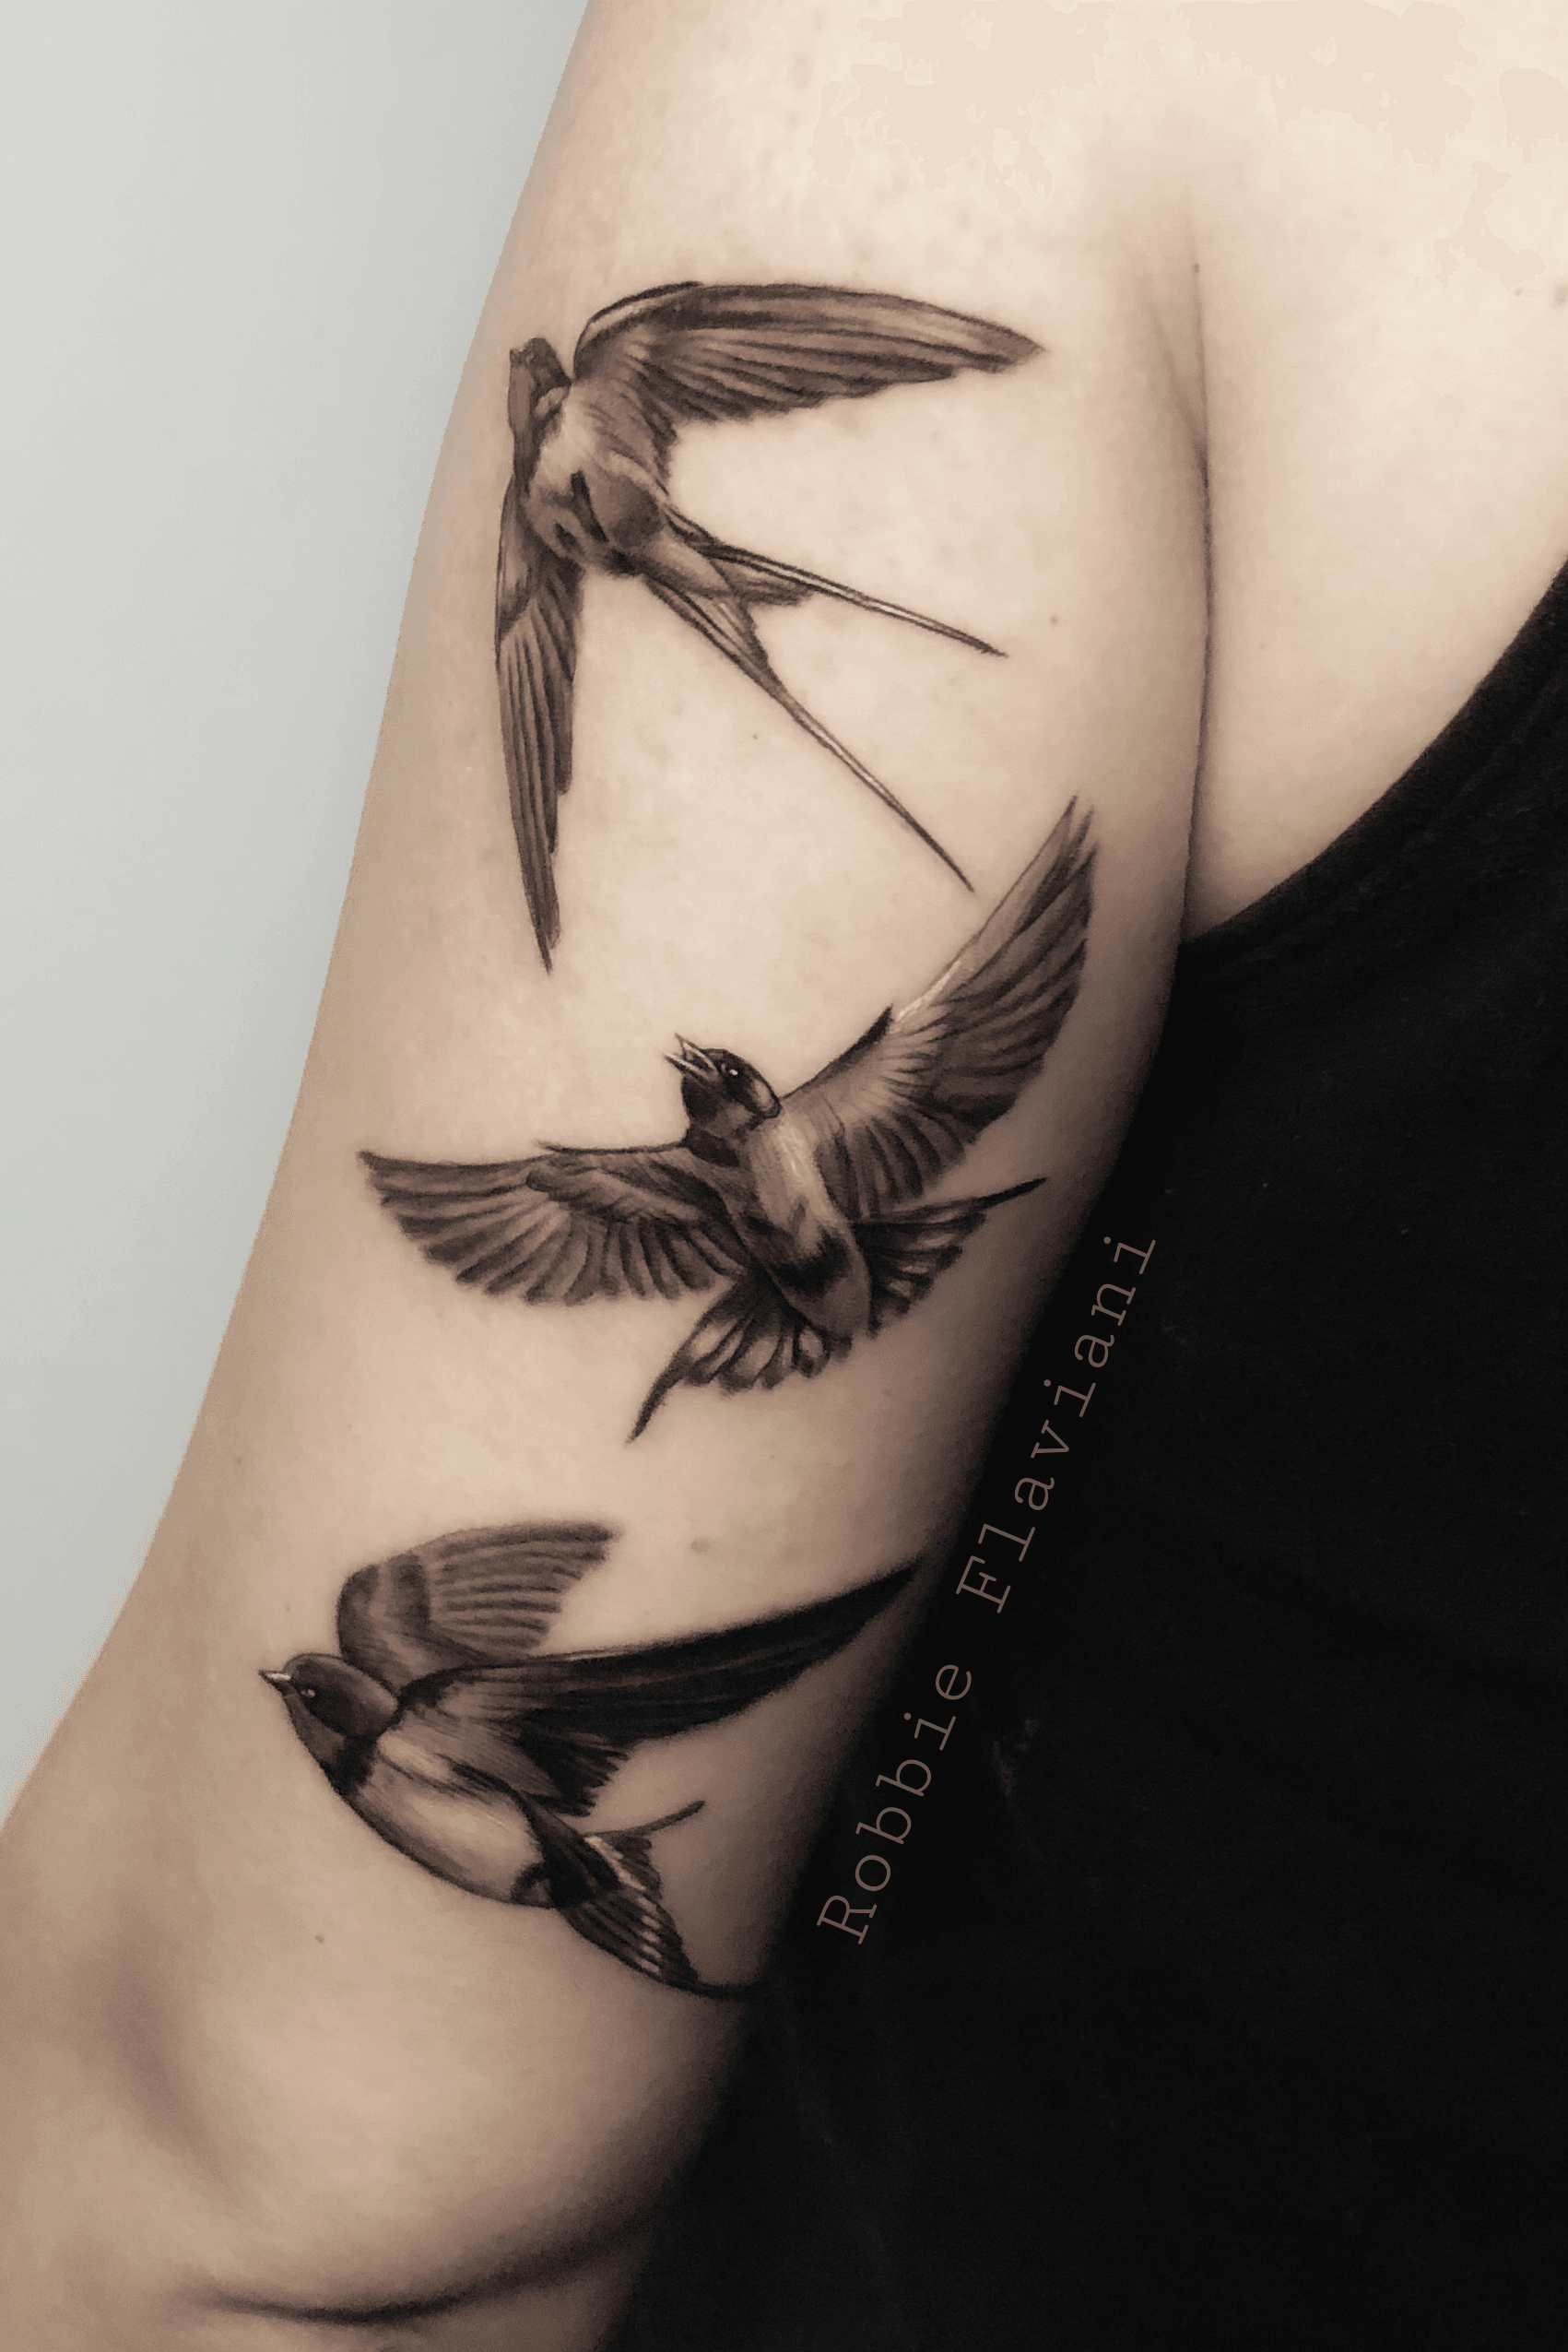 Black and grey swallows tattoo located on the forearm